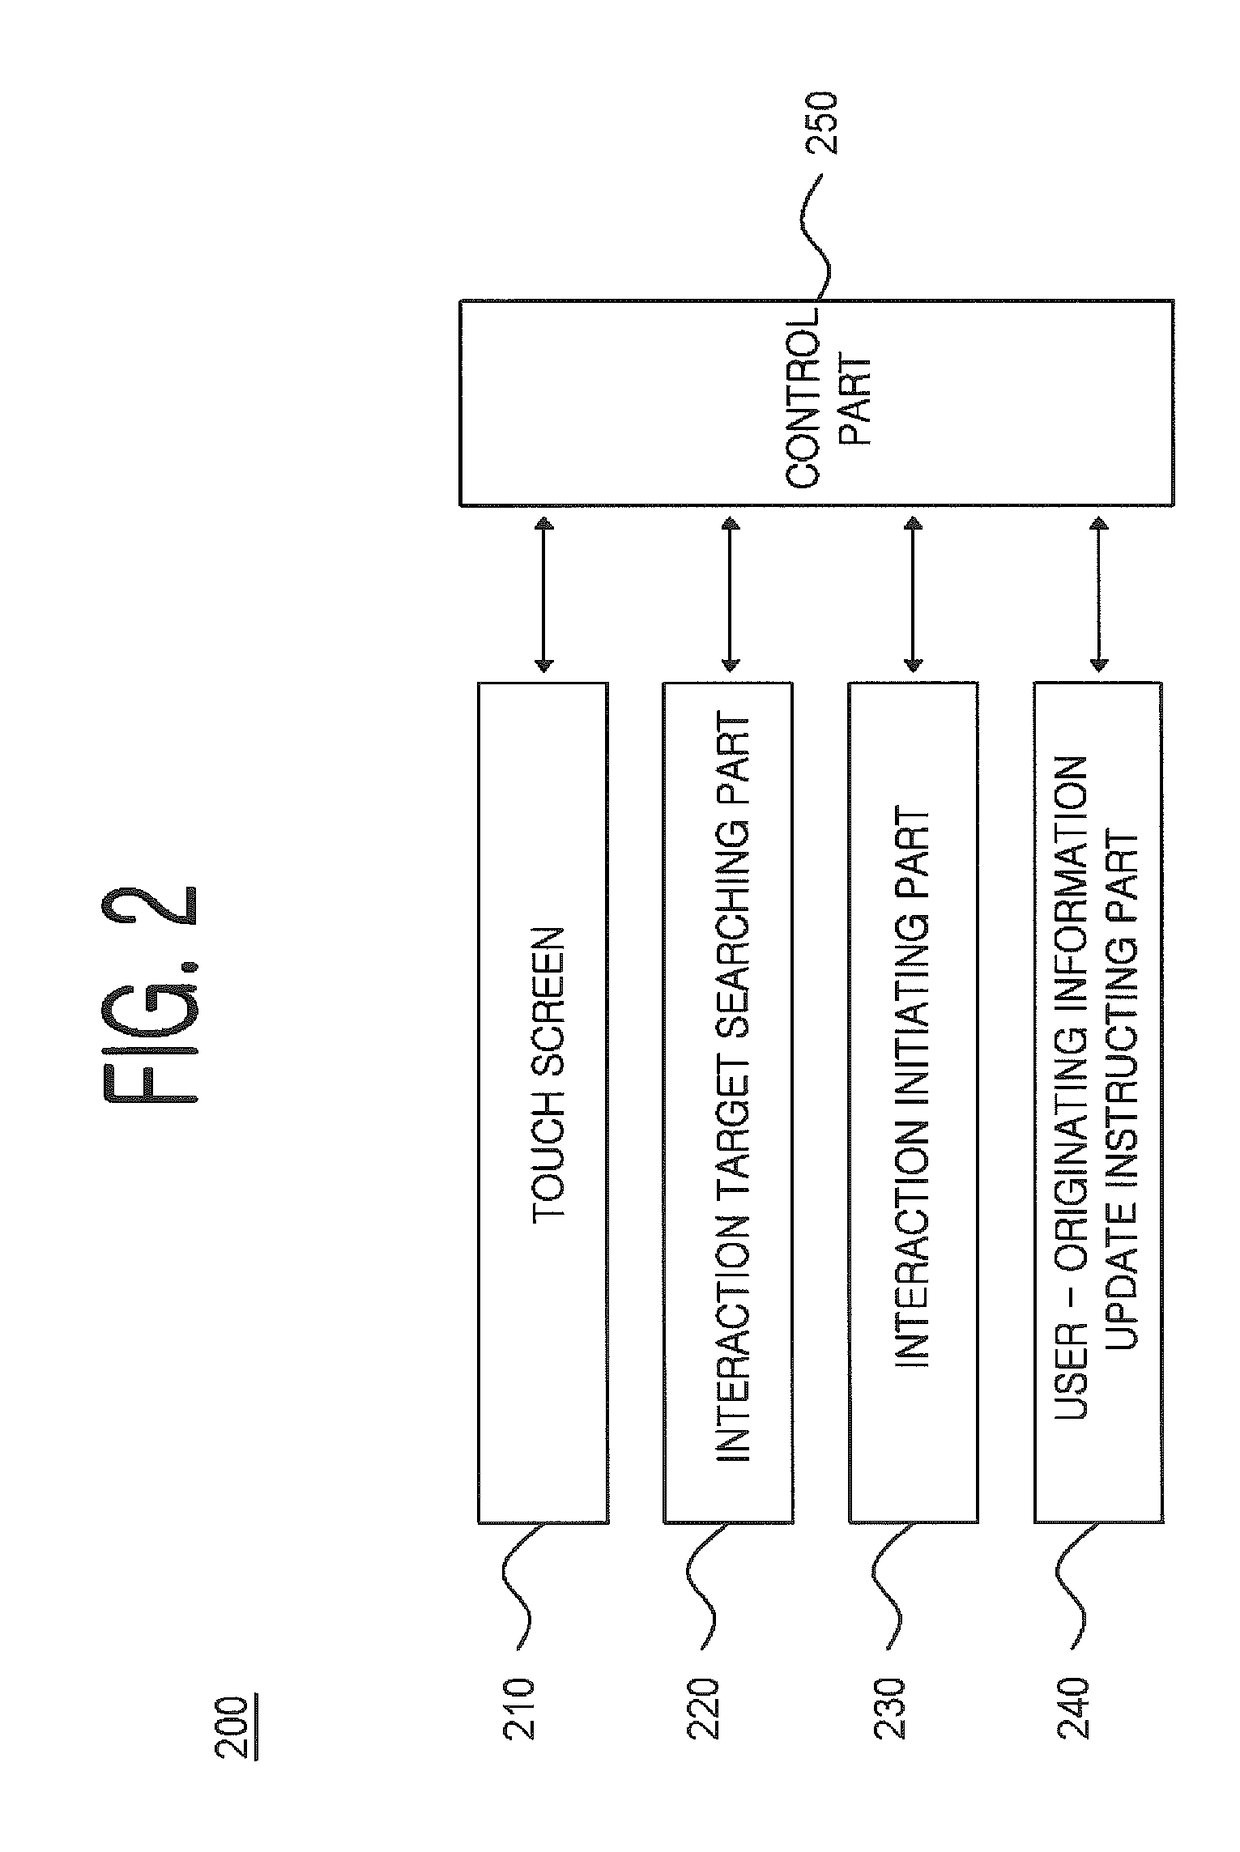 Method for changing user-originating information through interaction between mobile device and information display device